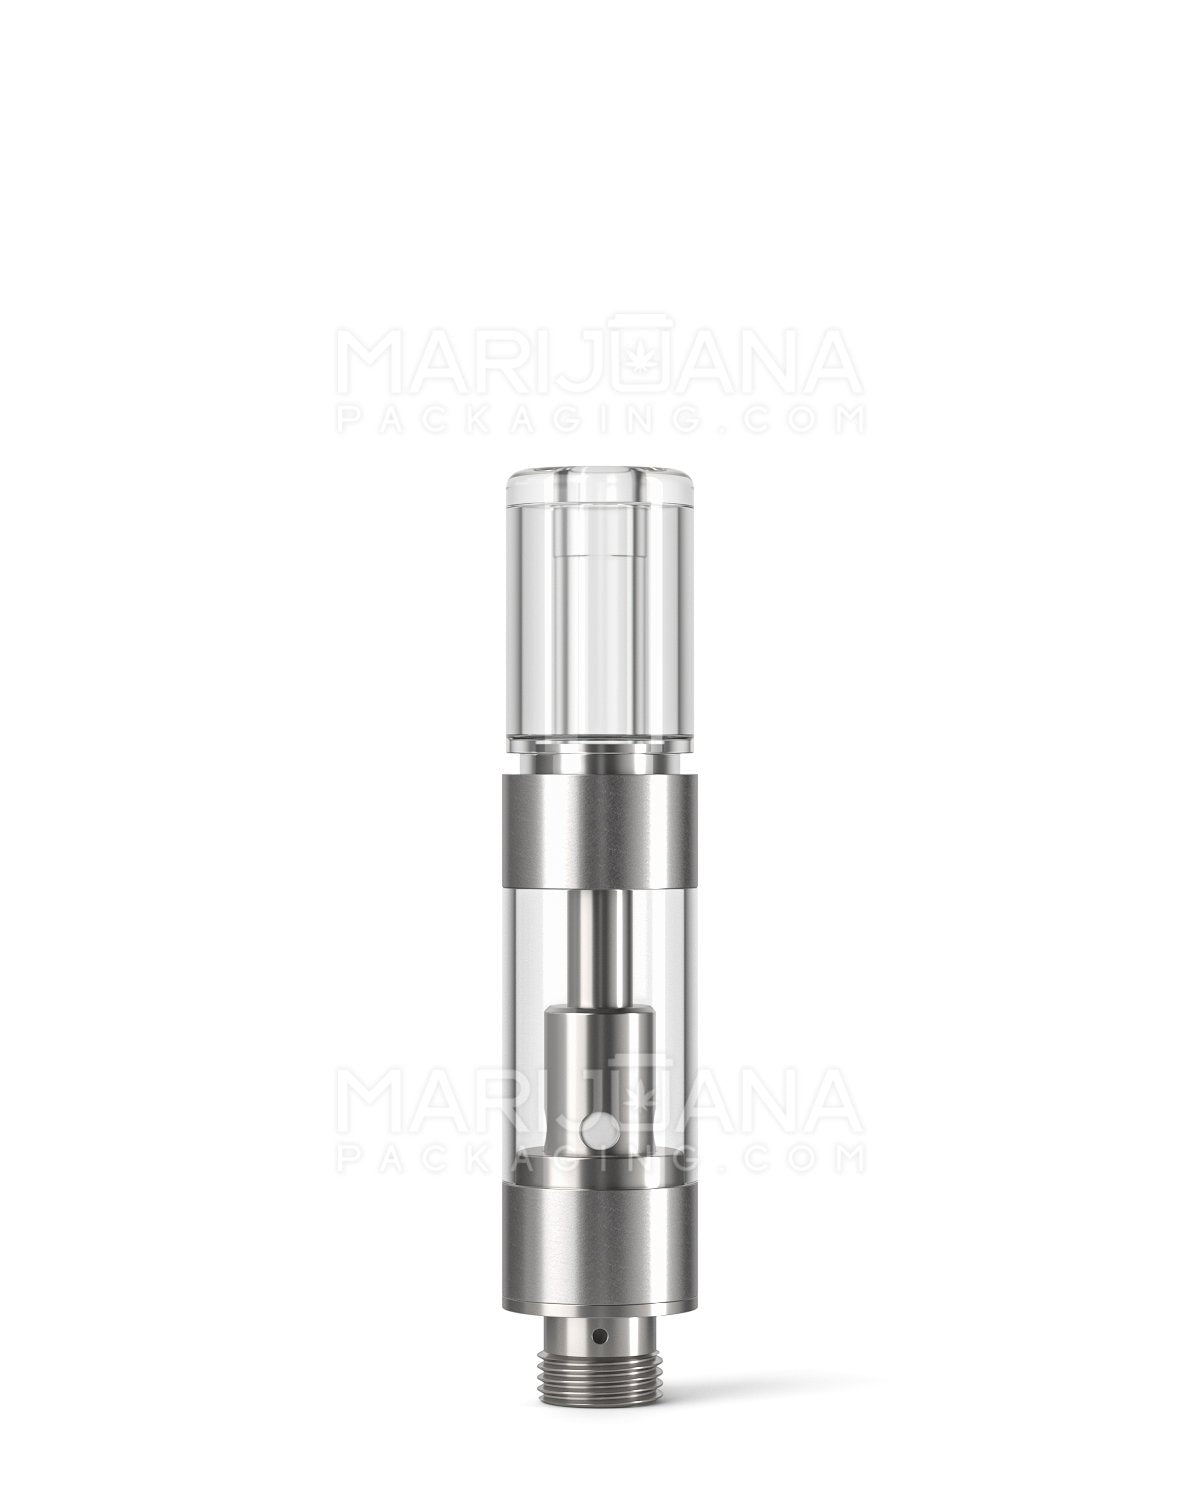 CCELL | Liquid6 Reactor Plastic Cartridge with Barrel Clear Plastic Mouthpiece | 0.5mL - Press On | Sample - 1